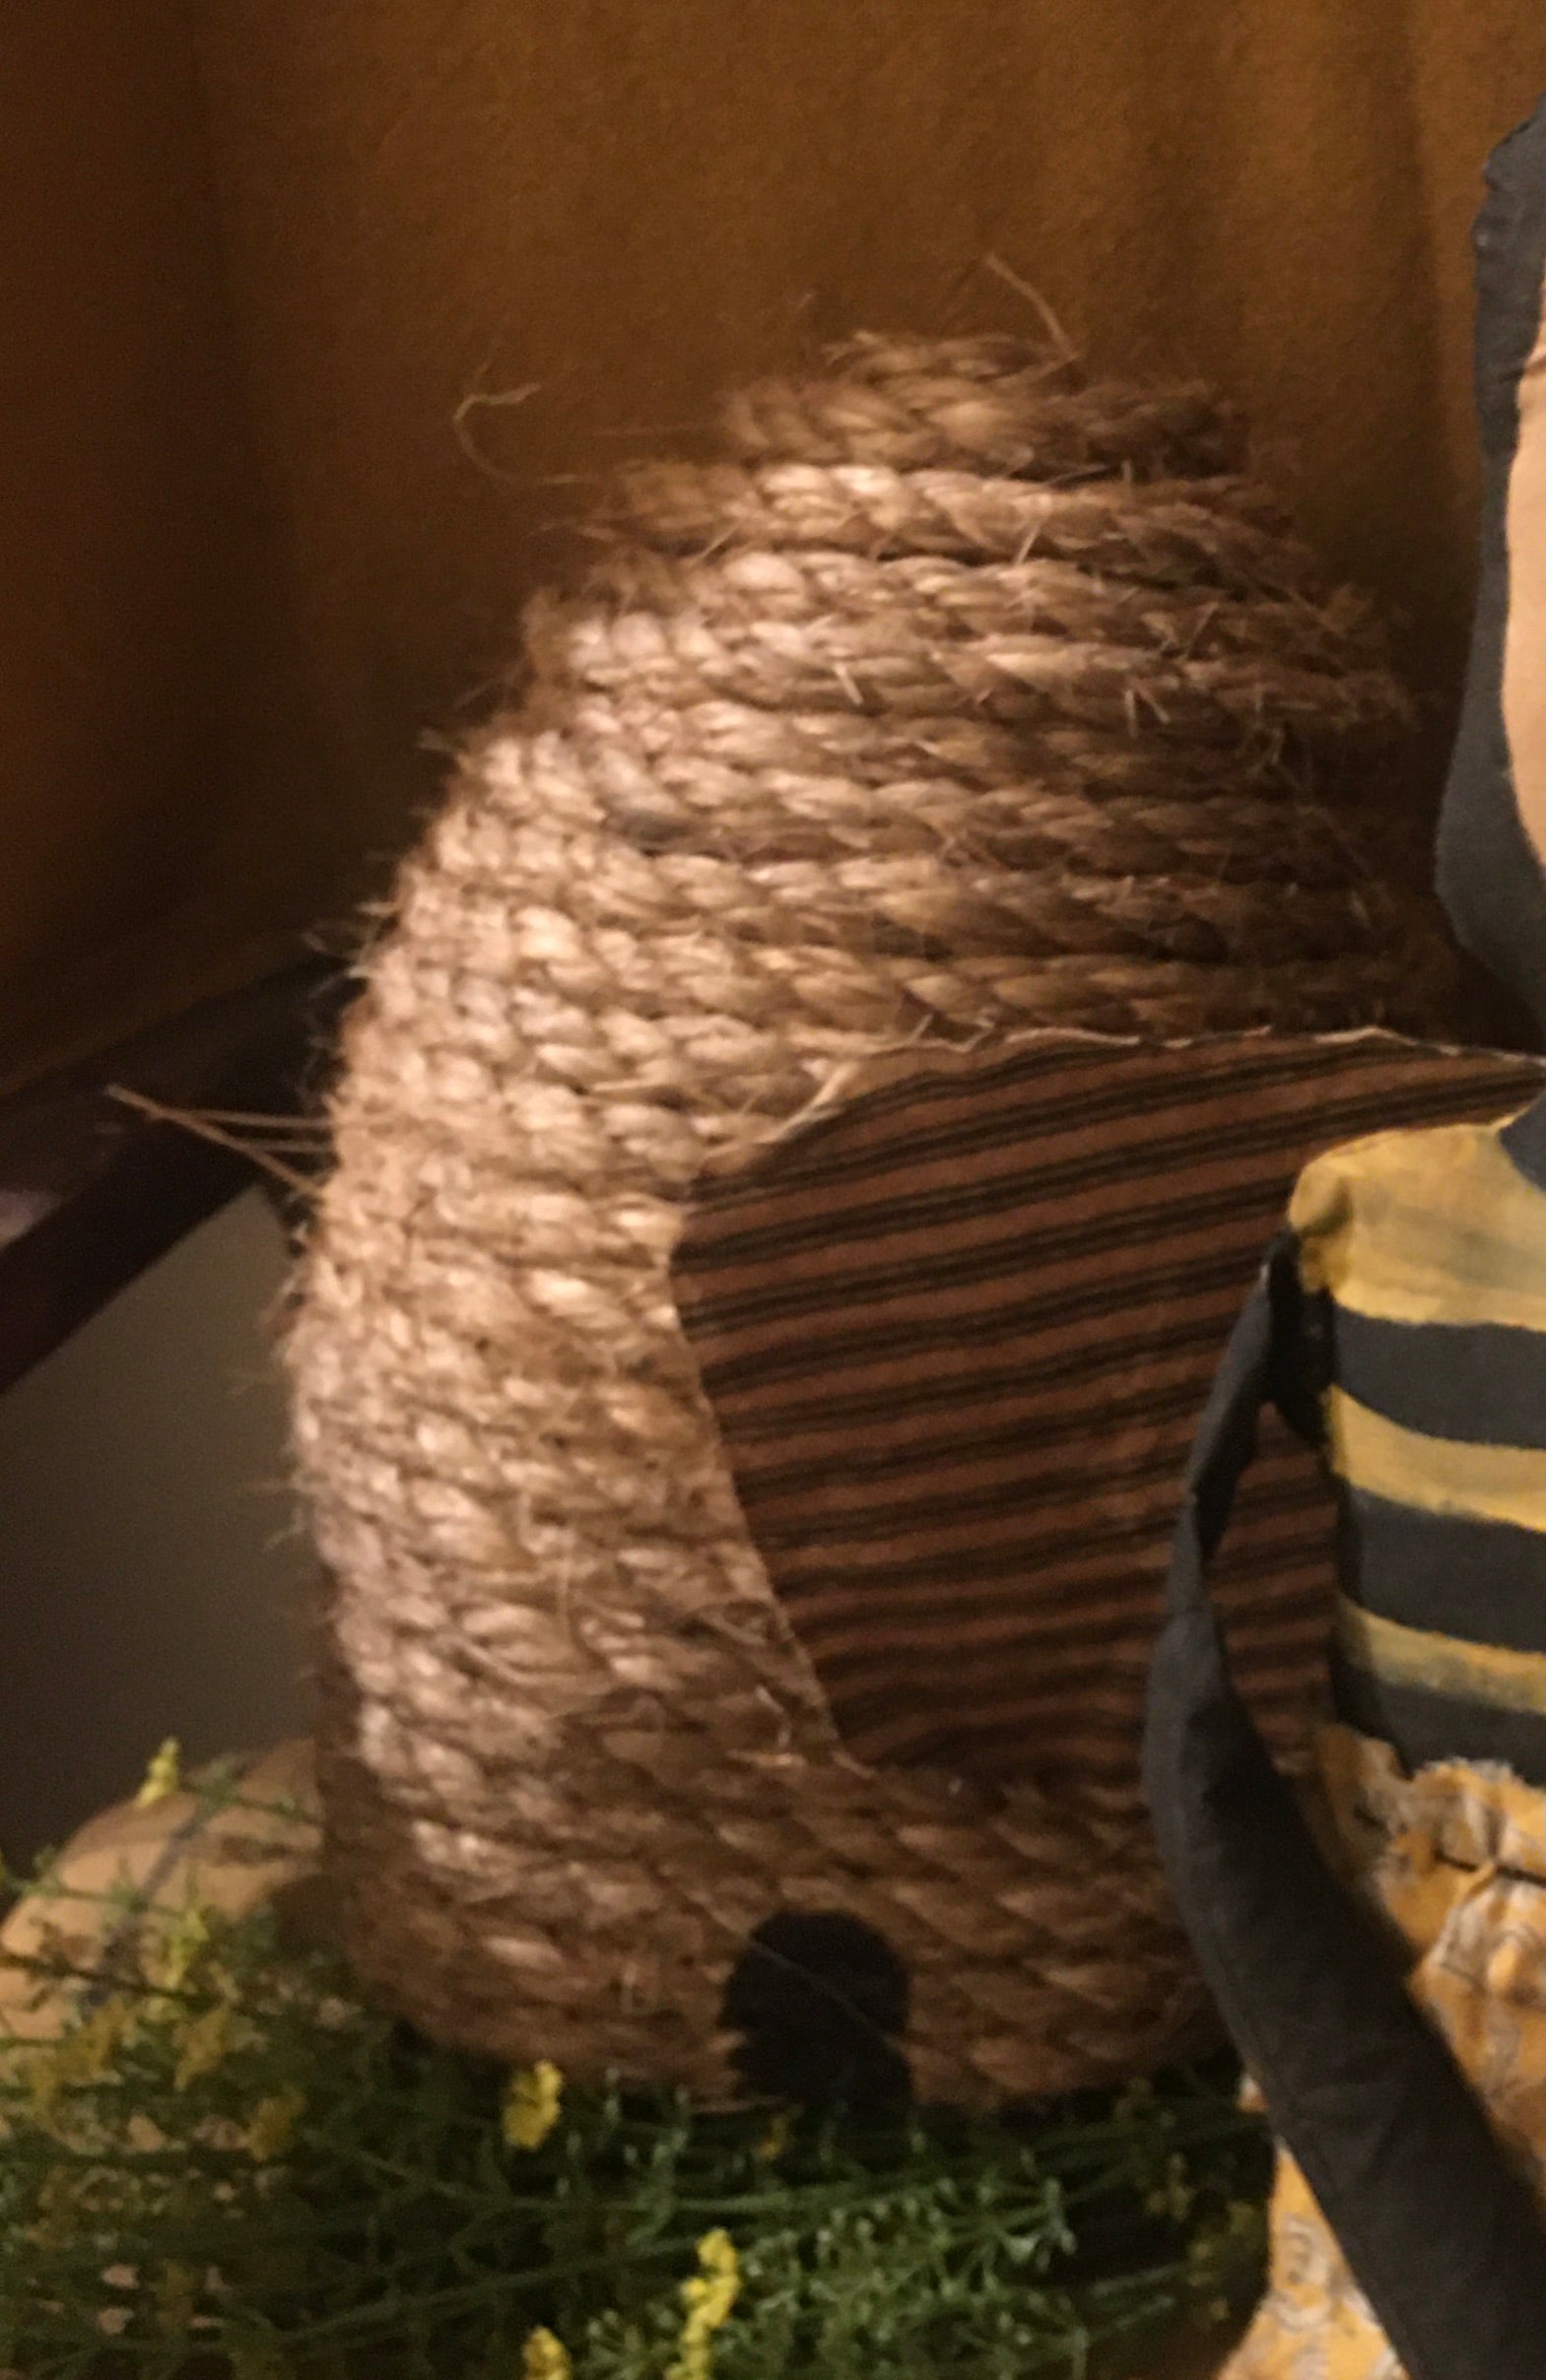 Decor Bee Hive Skep Tall – It's All About Bees!